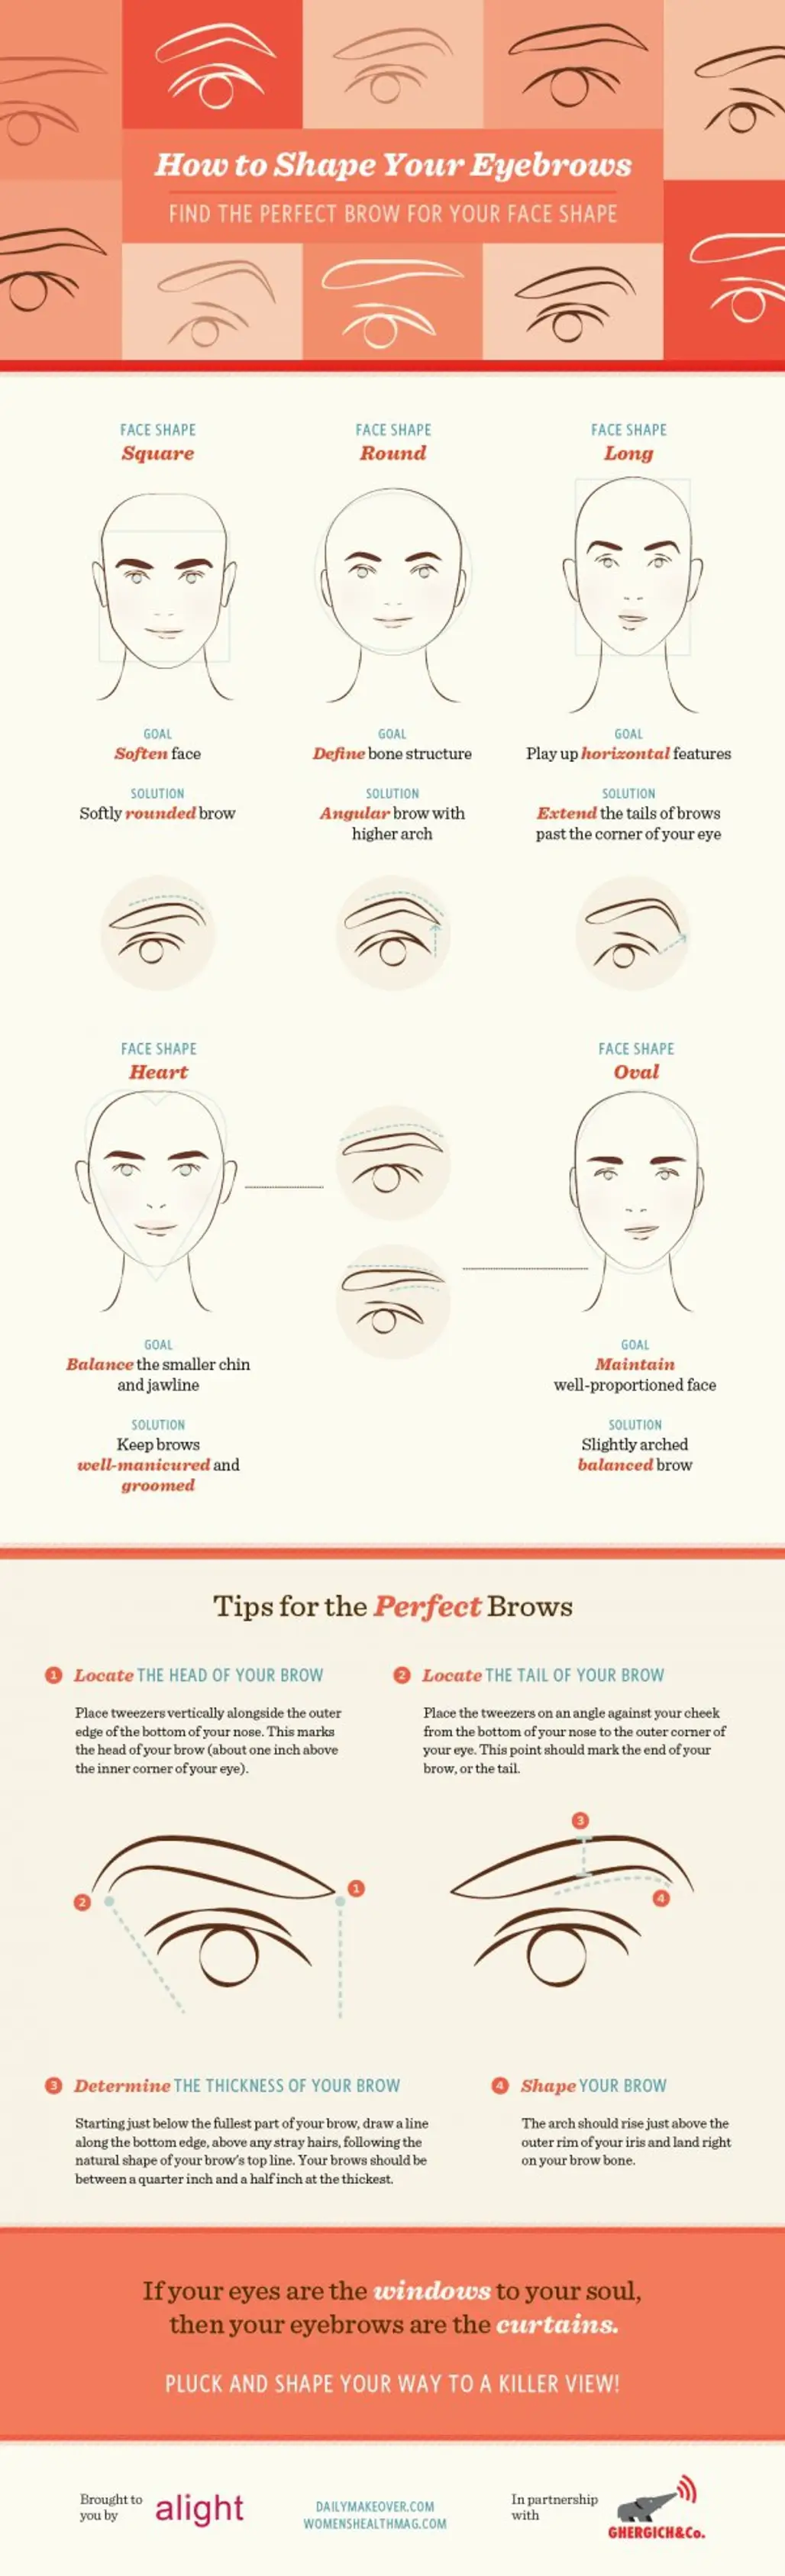 Which Eyebrows Are Best for Your Face Shape?